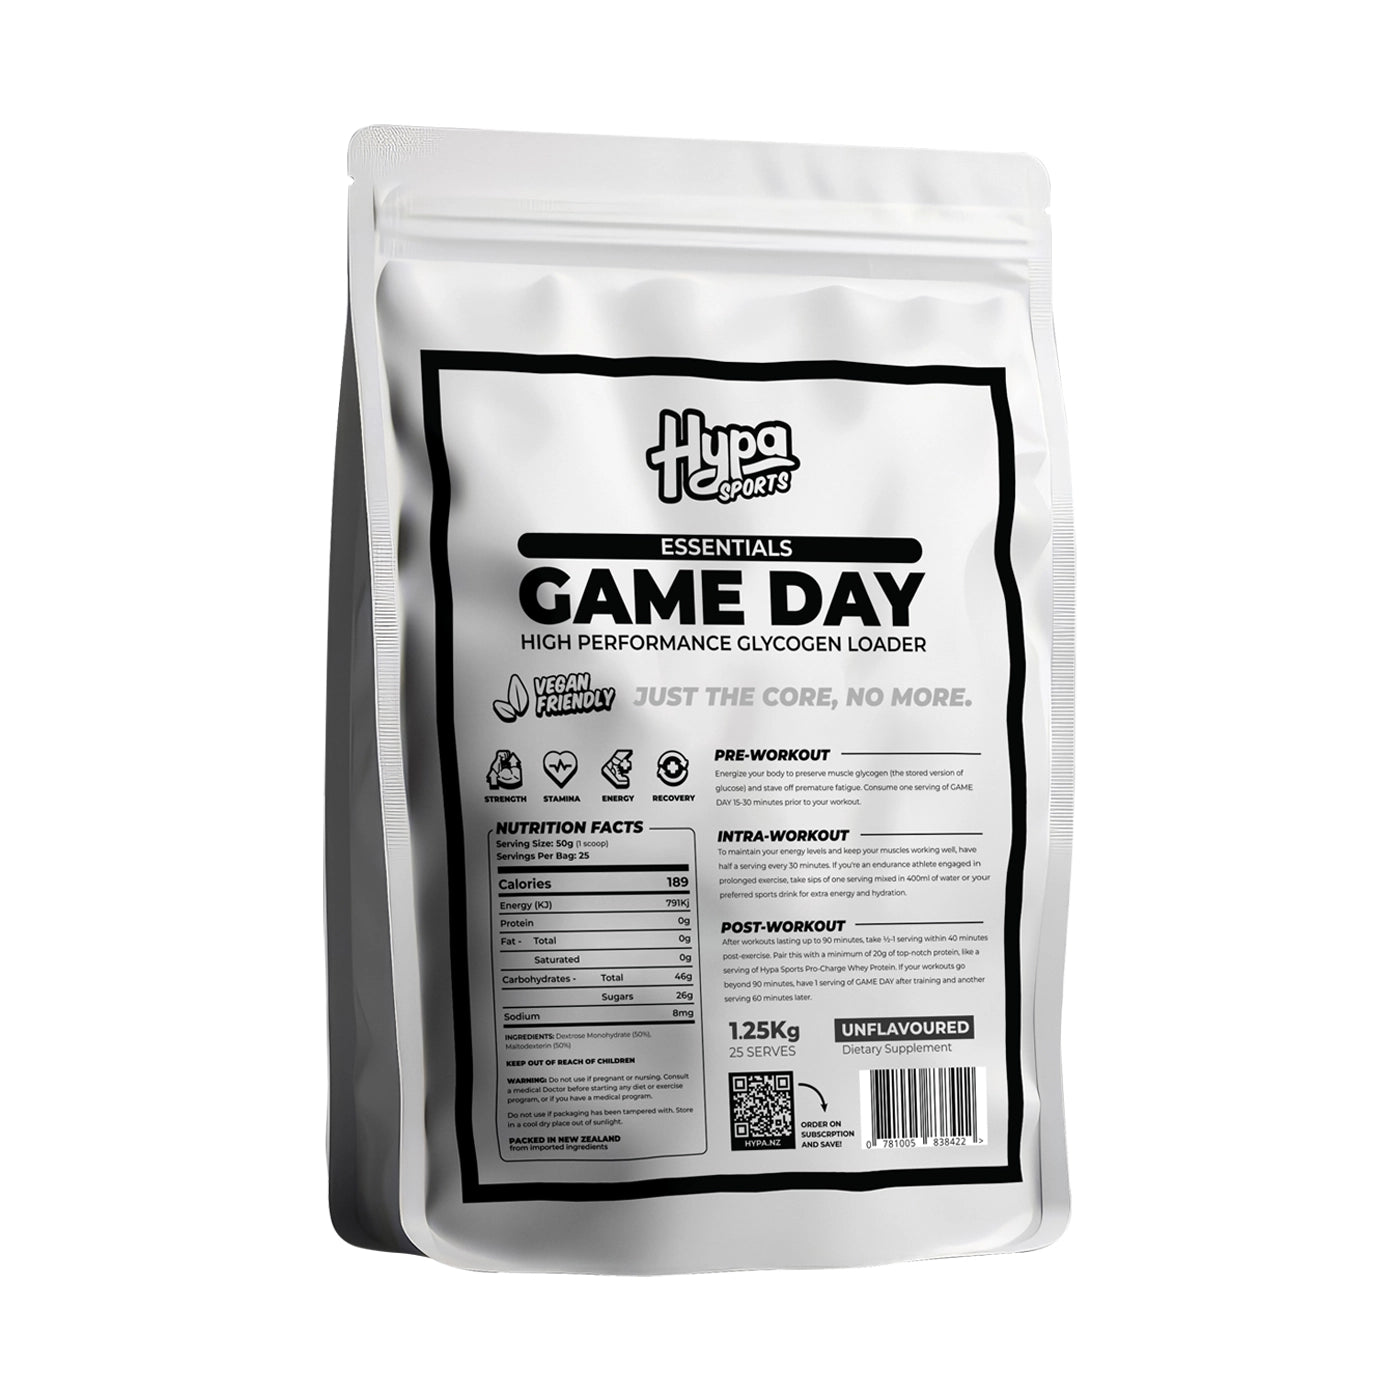 GAMEDAY: Get 2 for $49.95 - Hypa Christchurch - Hypa Christchurch